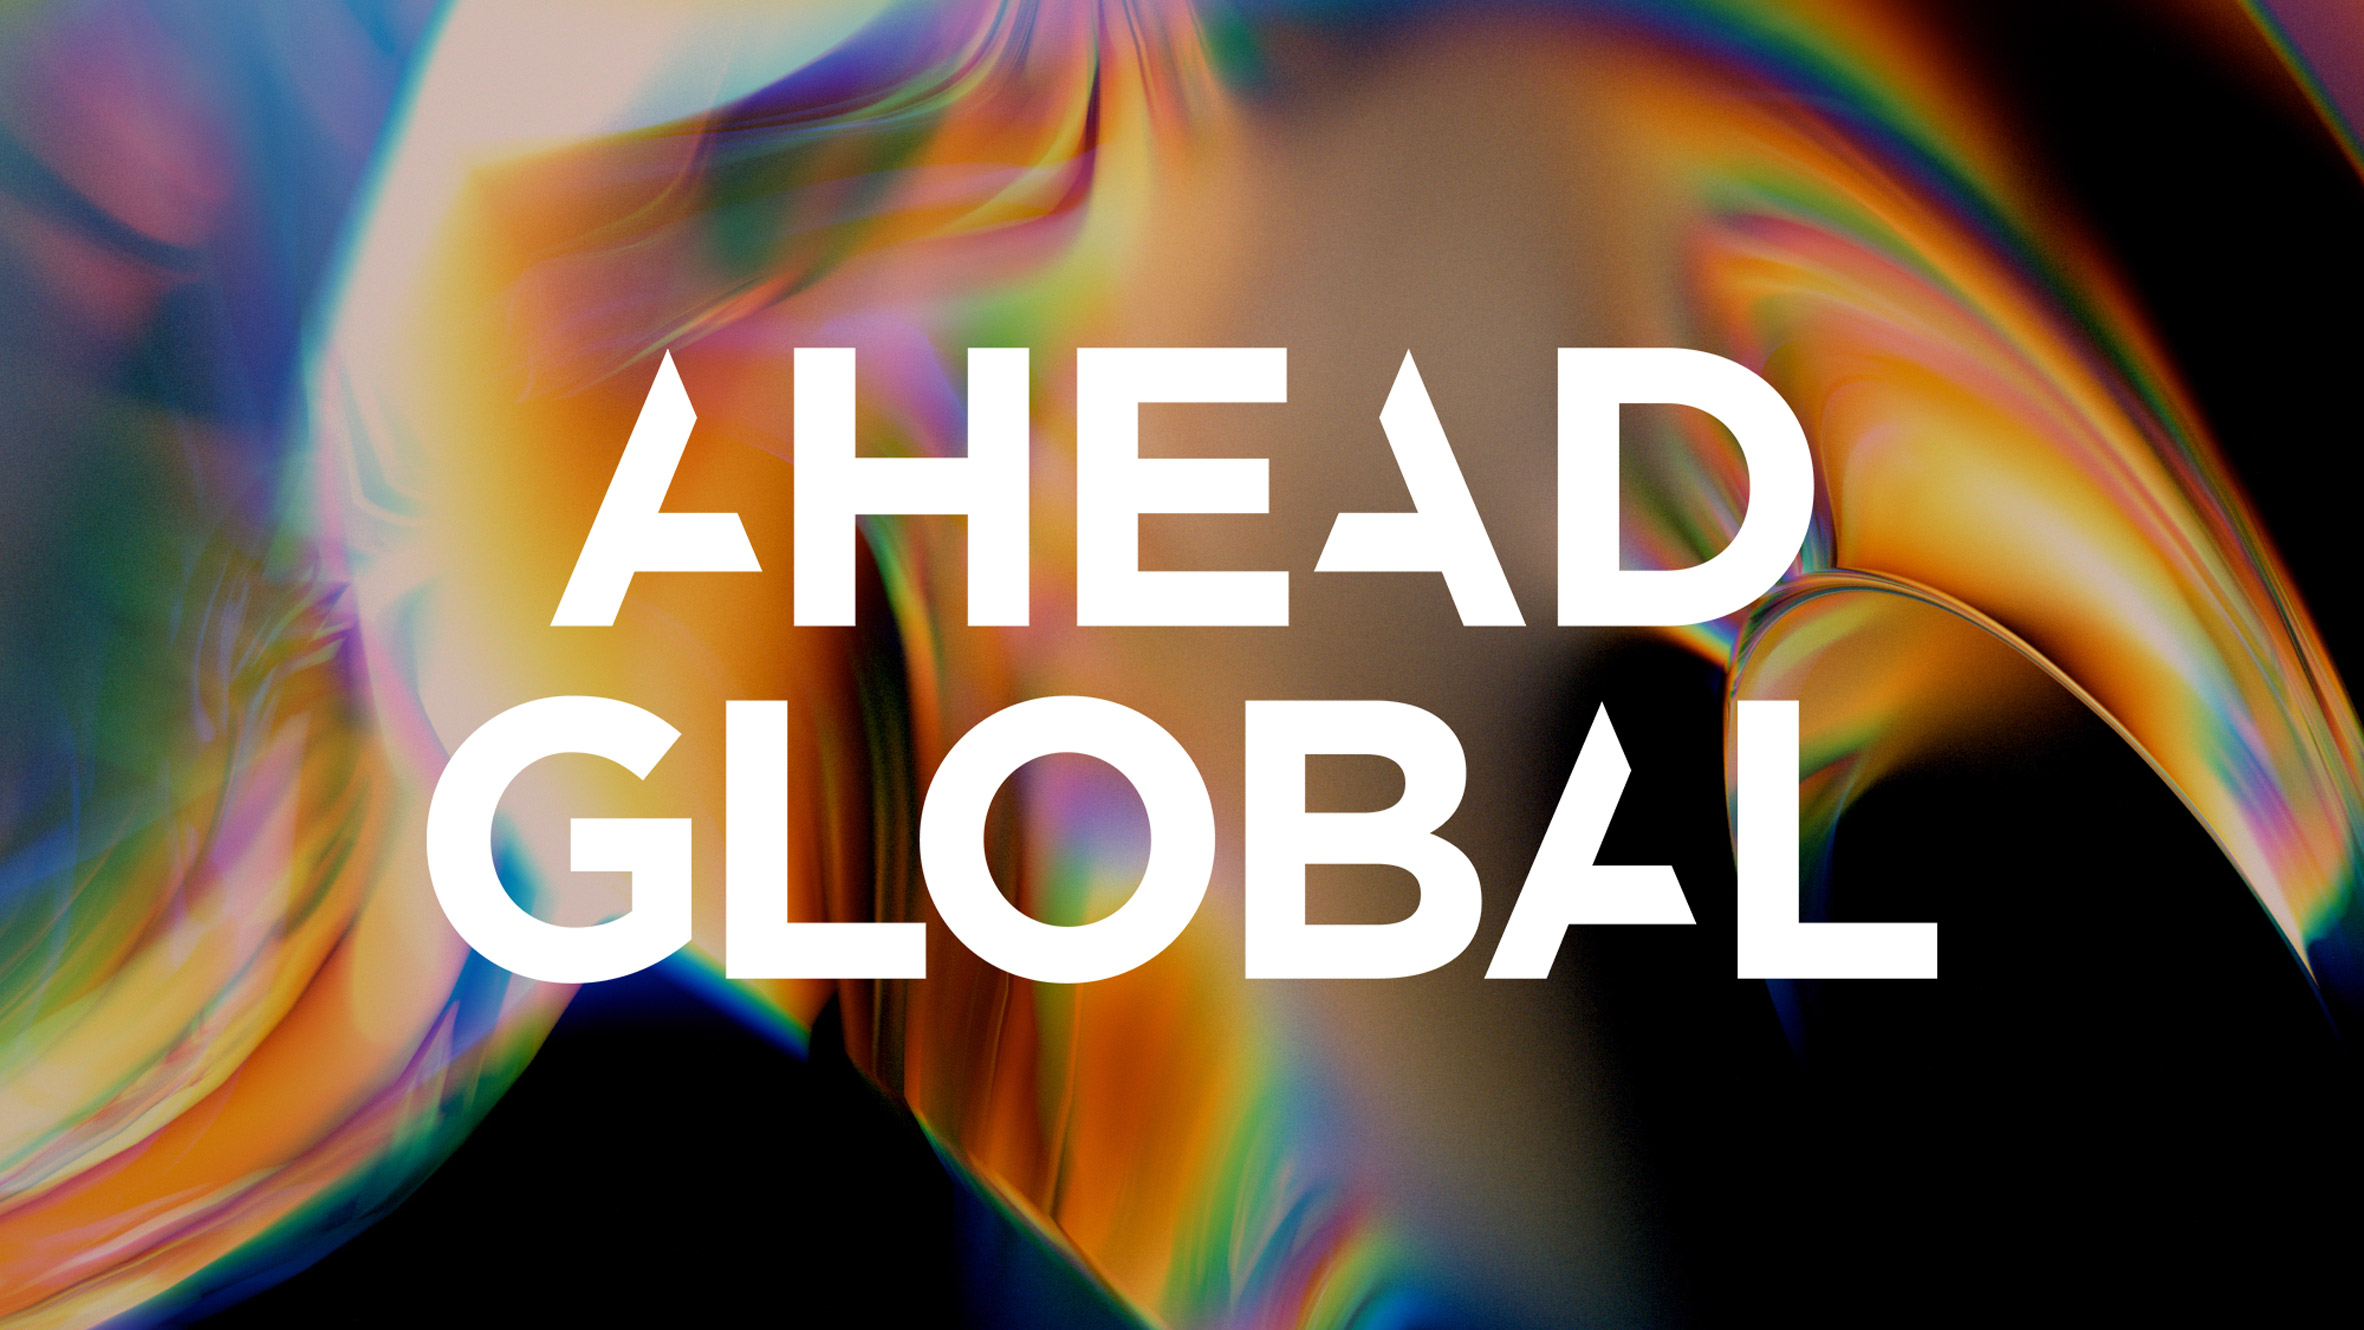 Watch the final part of the AHEAD Global 2021 hospitality awards